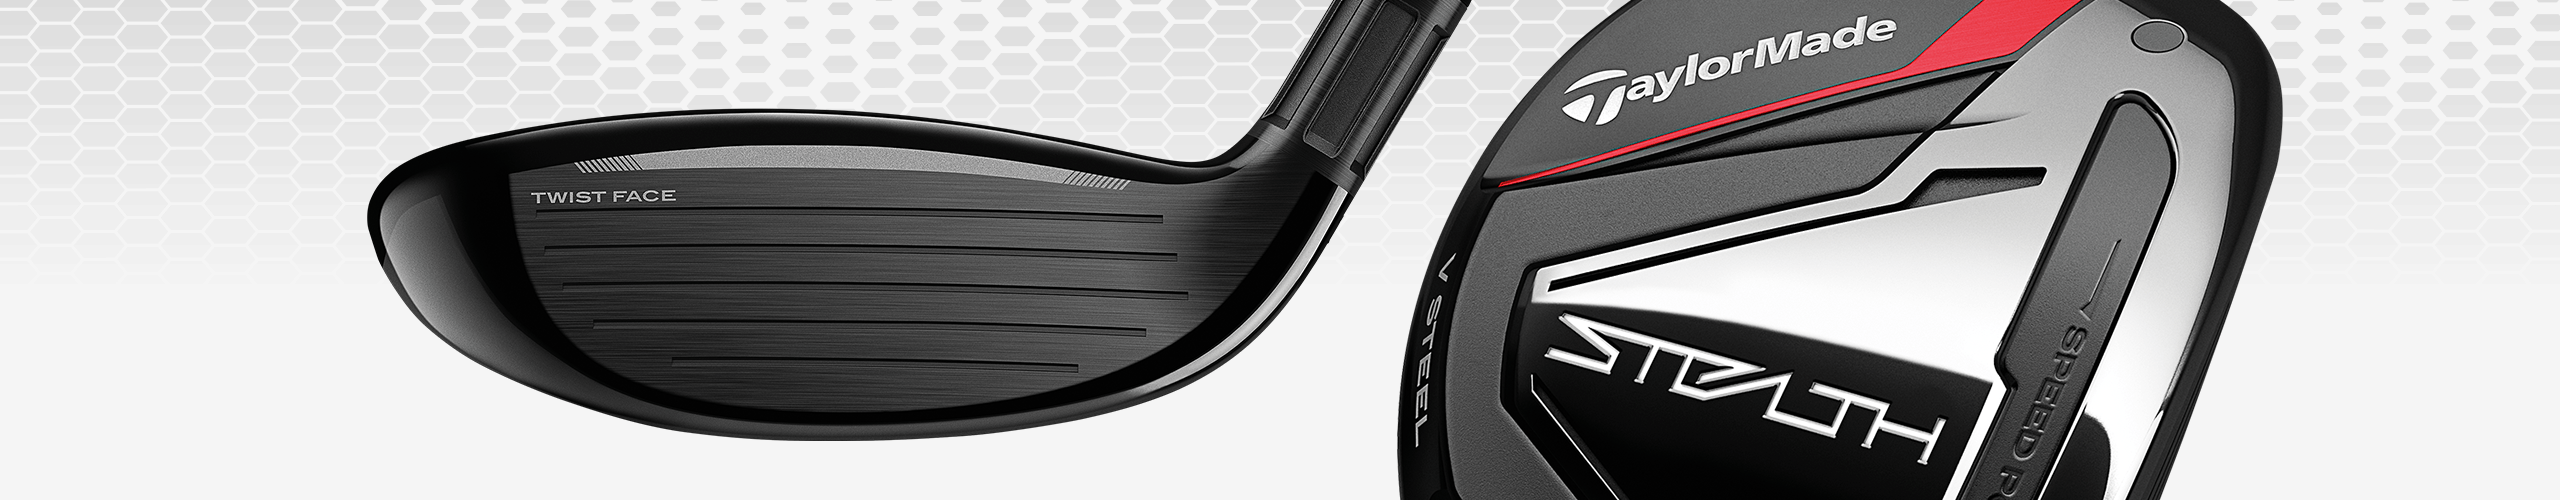 TaylorMade Stealth Driver face Image